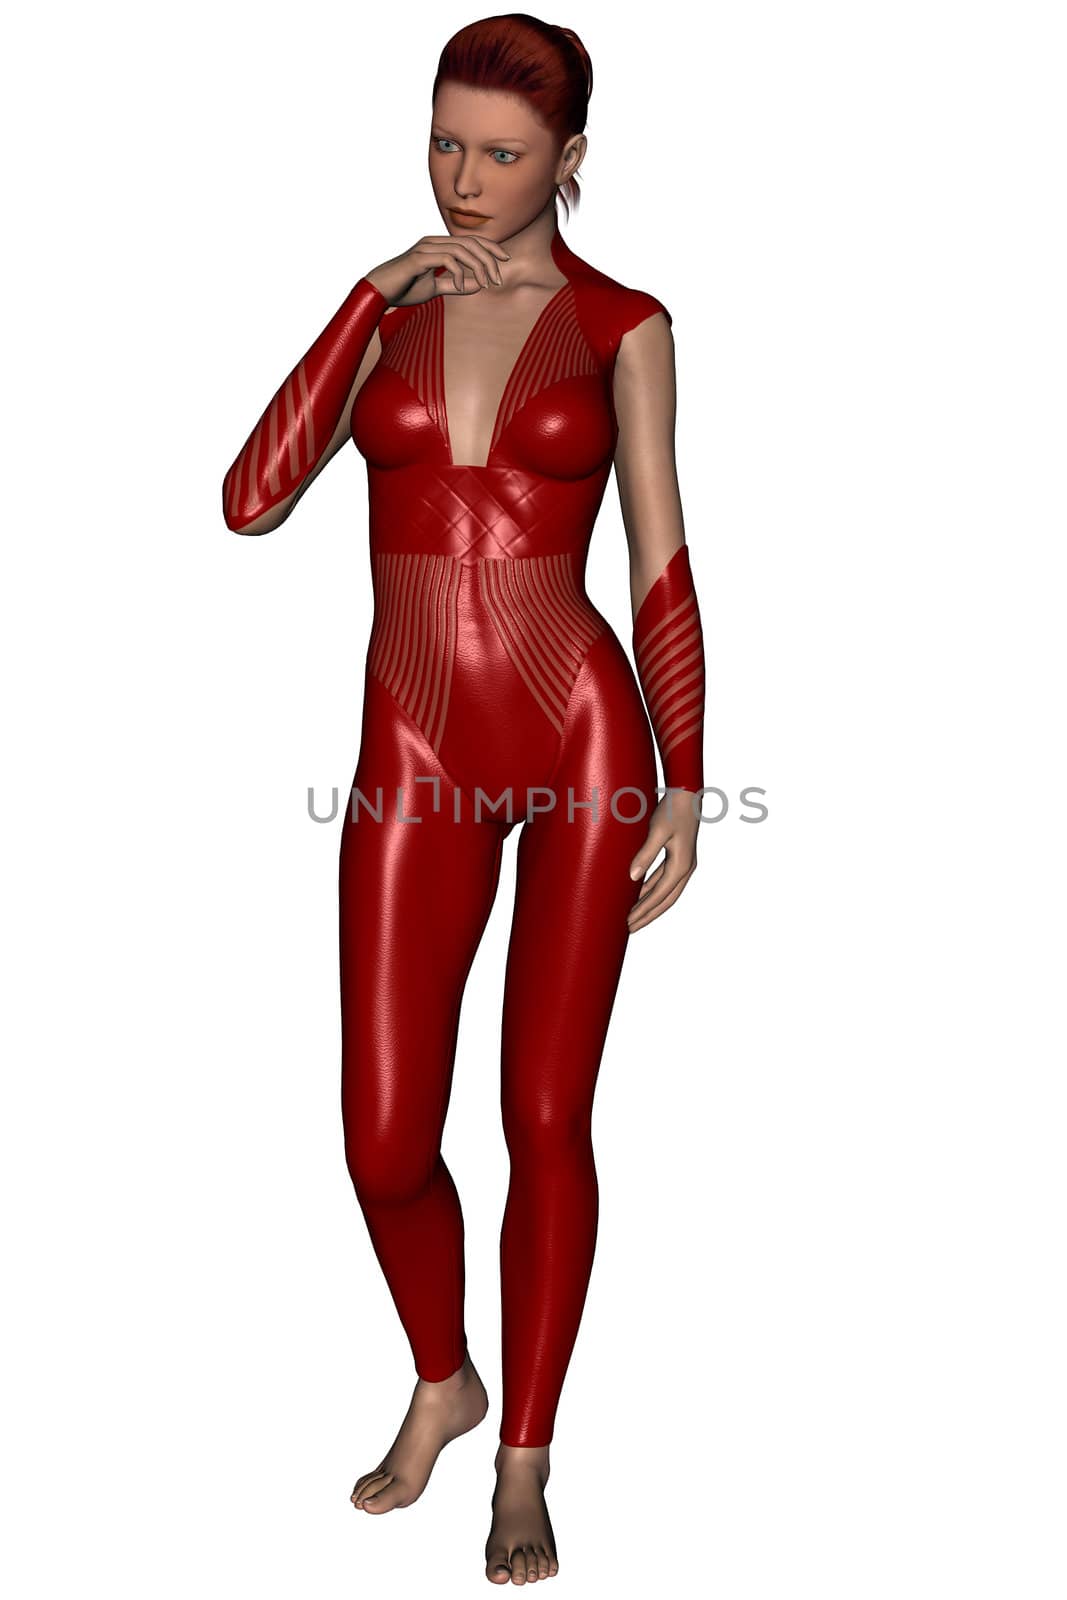 Pretty woman in bodysuit rendered on white background isolated